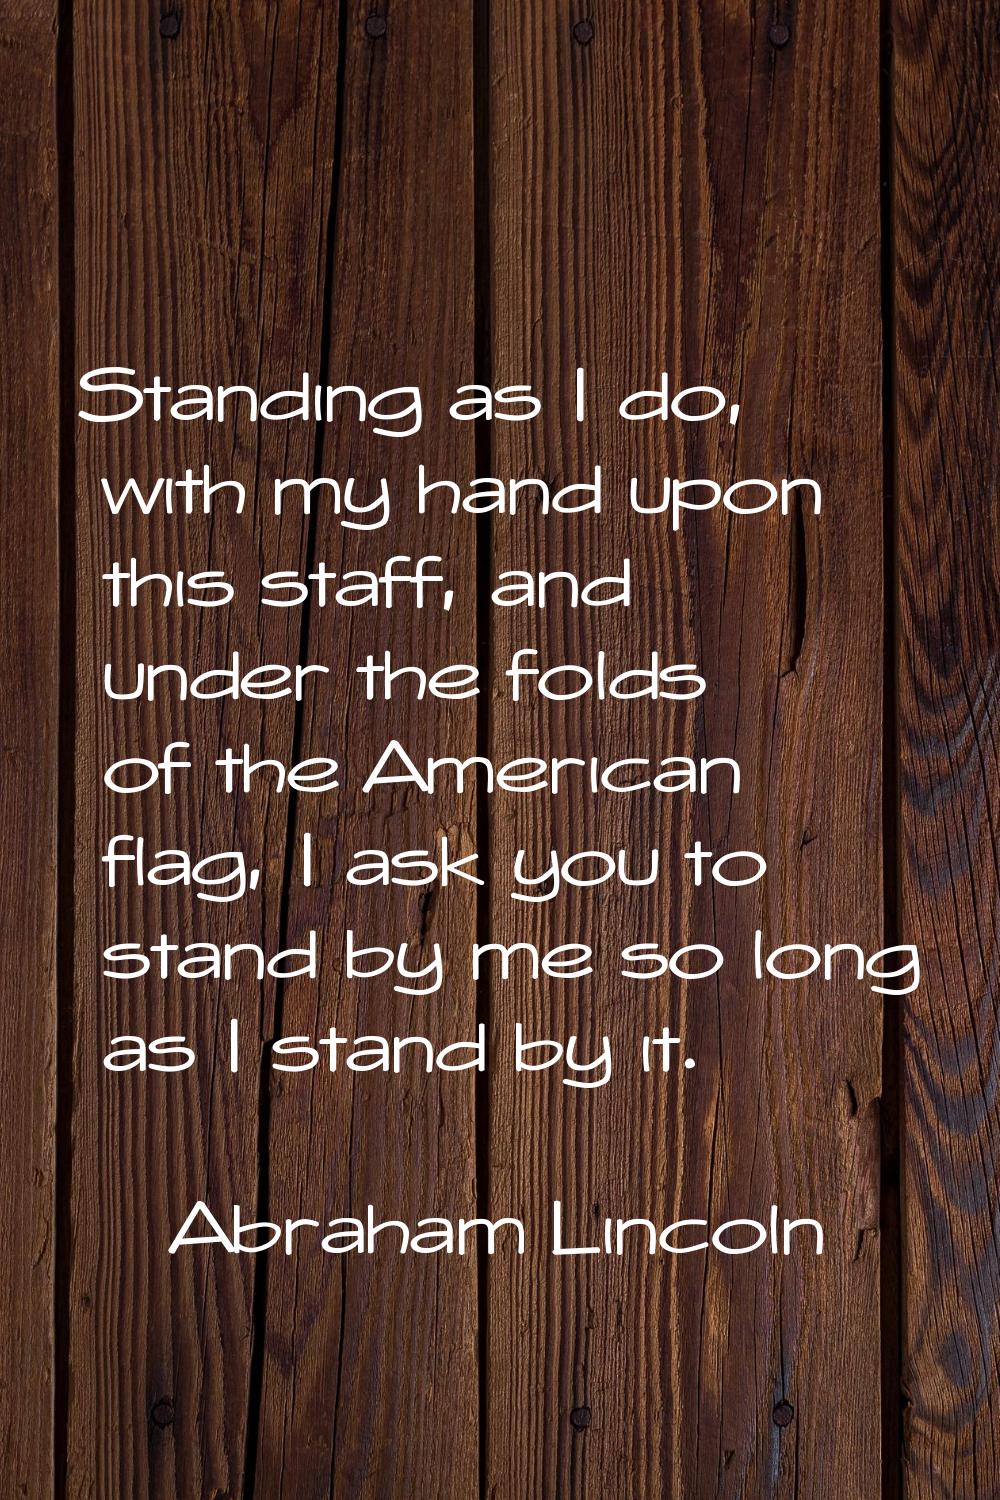 Standing as I do, with my hand upon this staff, and under the folds of the American flag, I ask you